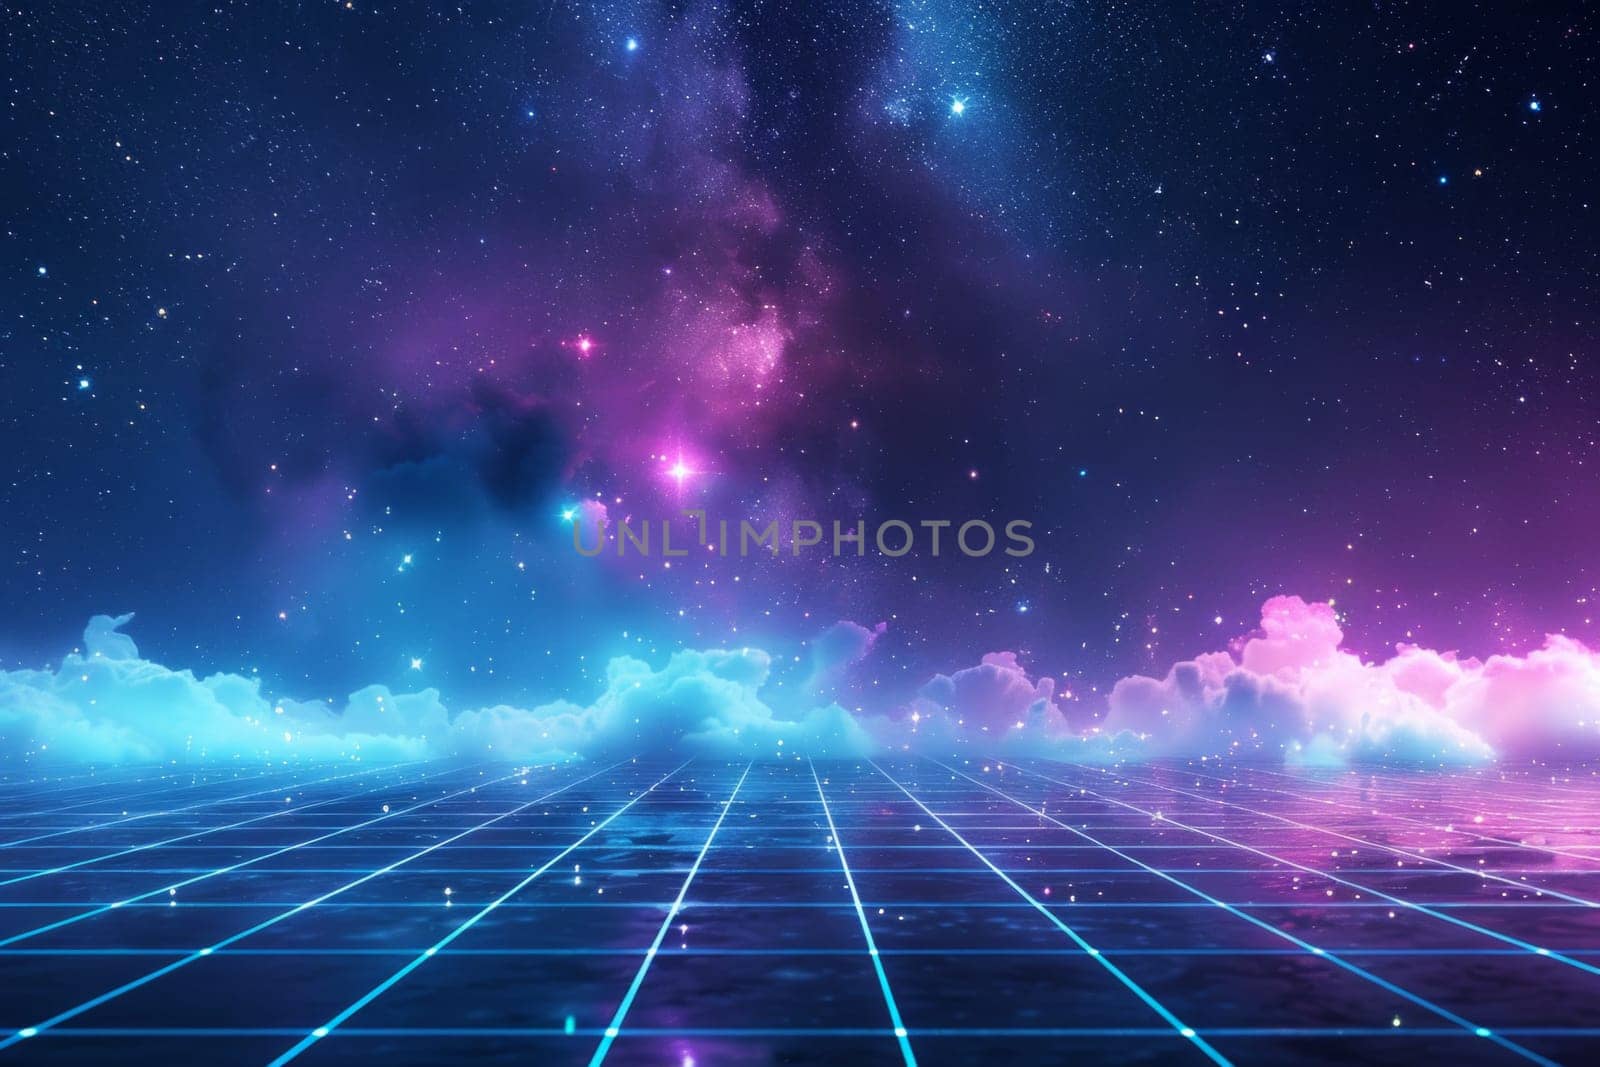 Abstract empty futuristic blue and purple background with a light grid floor and stars in the dark in the background by papatonic